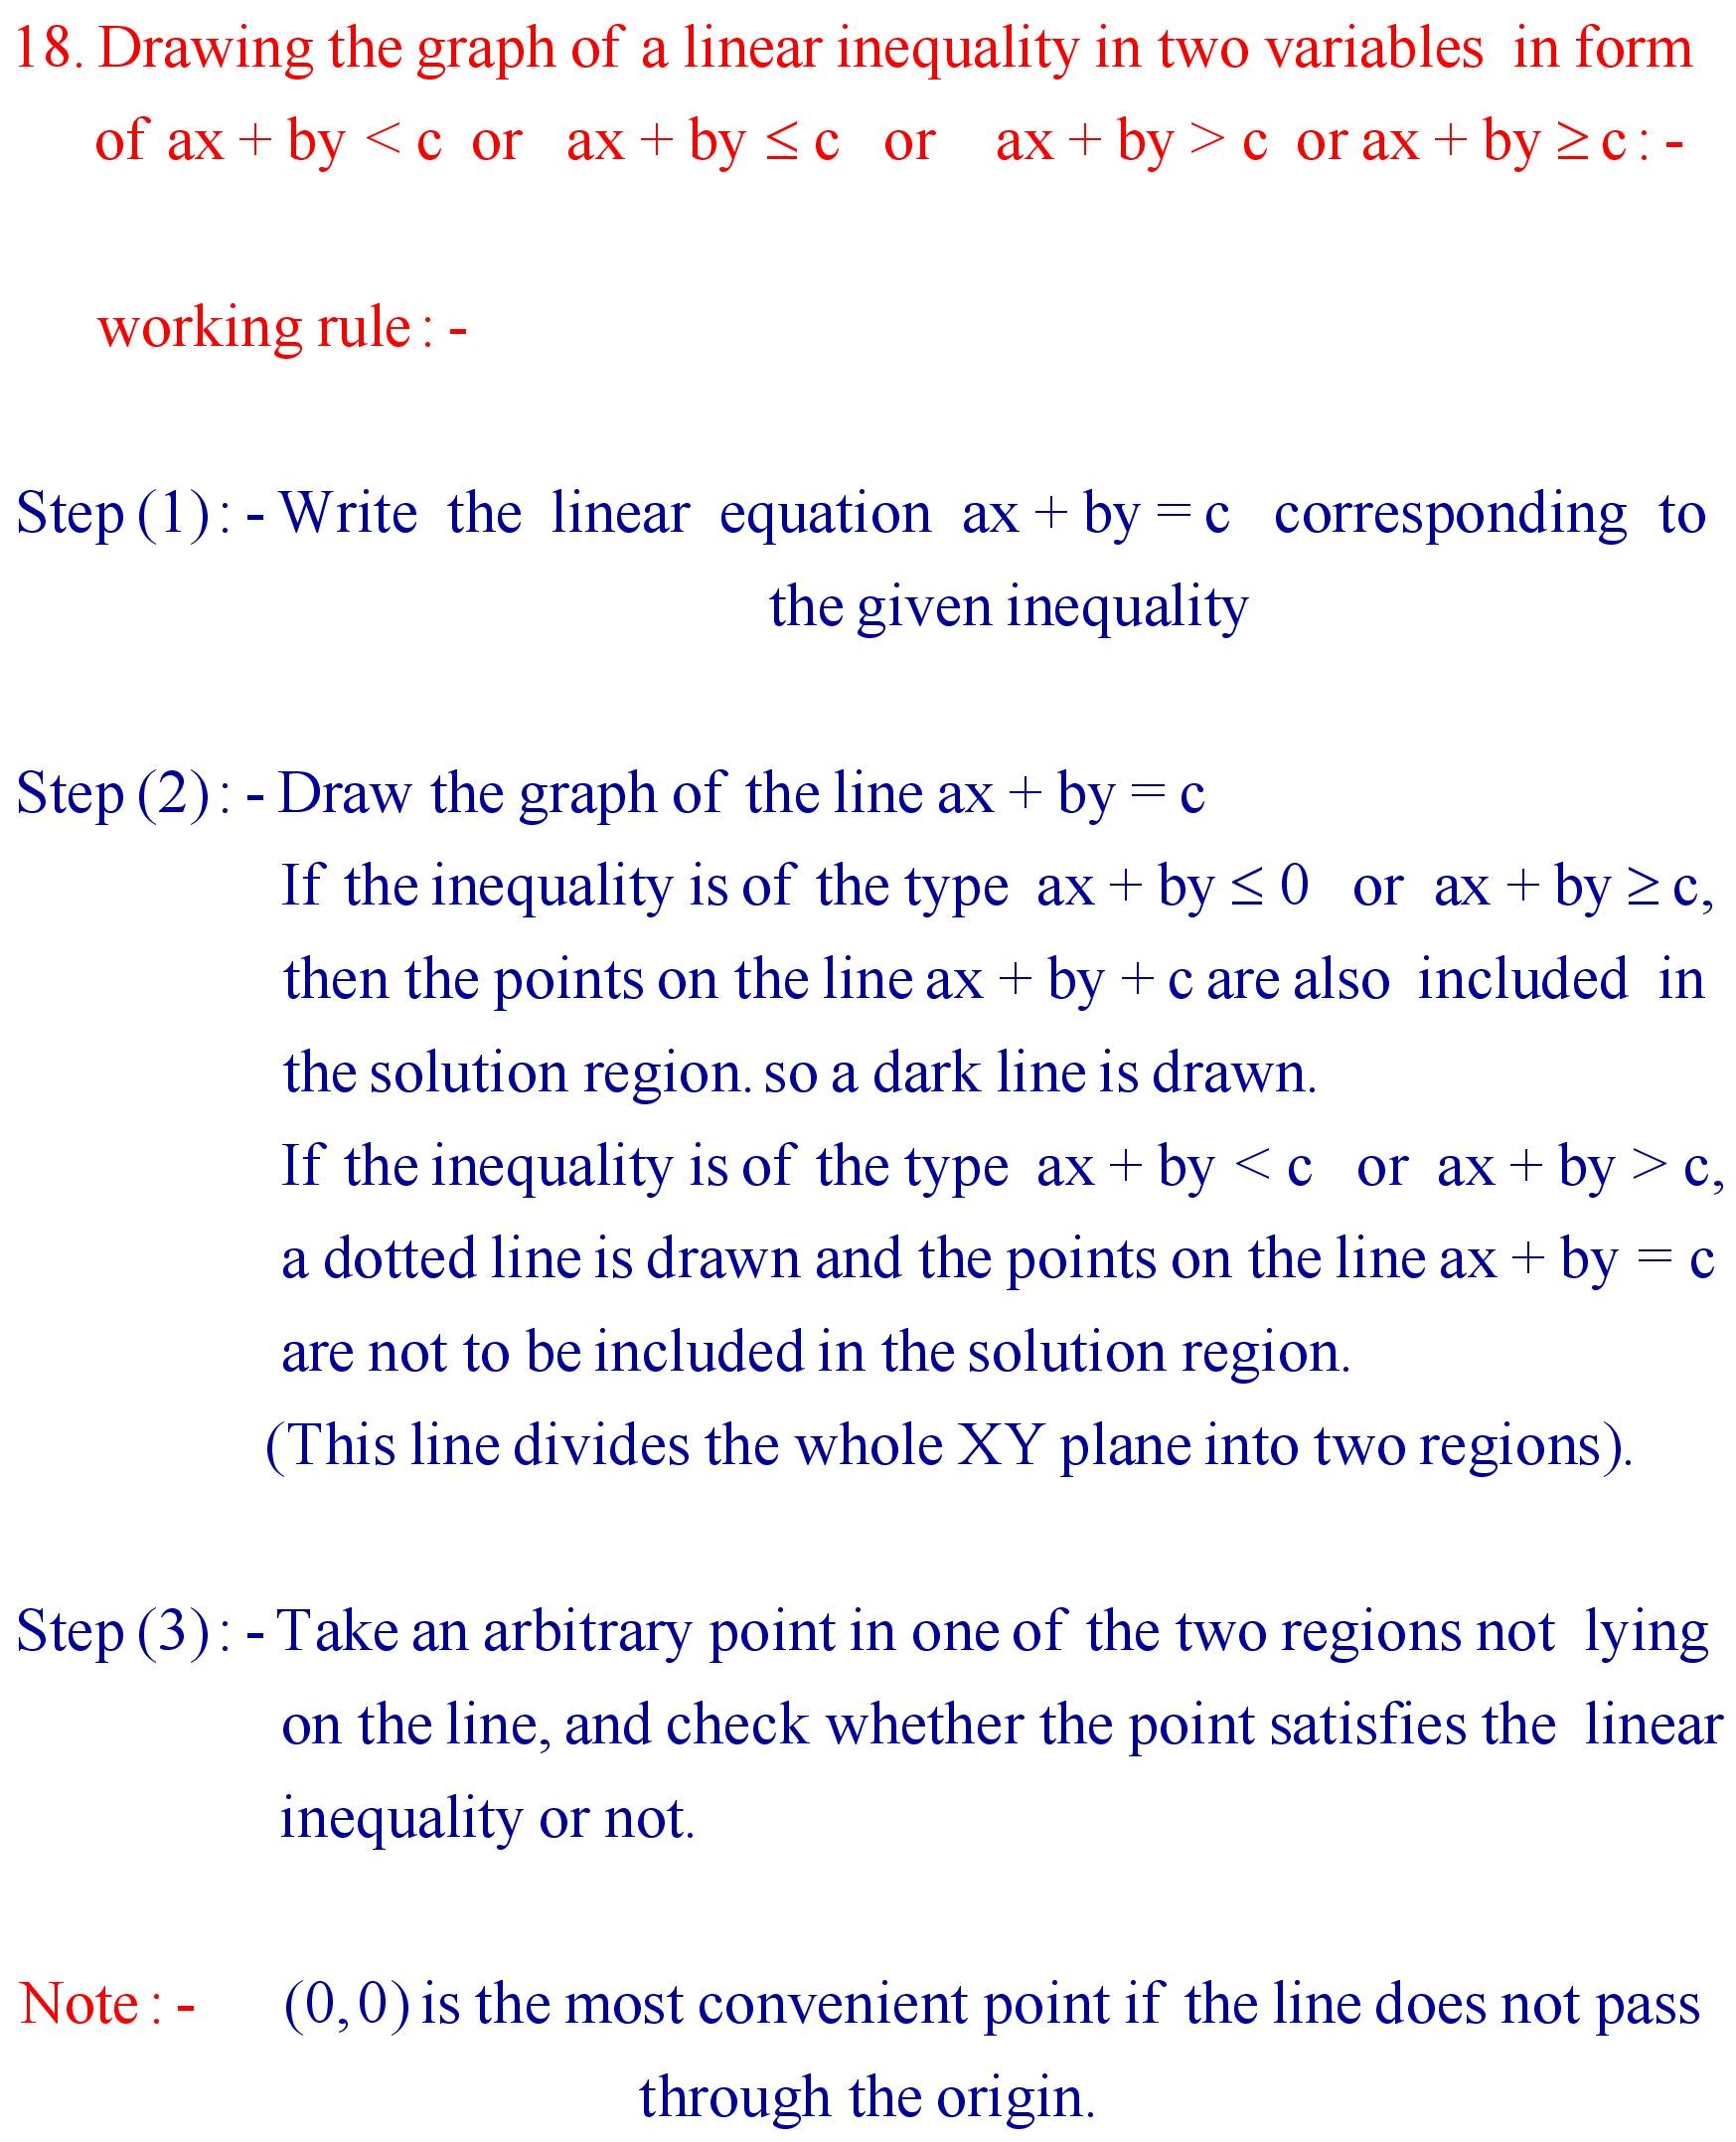 Graphical solution of linear inequations in two variables